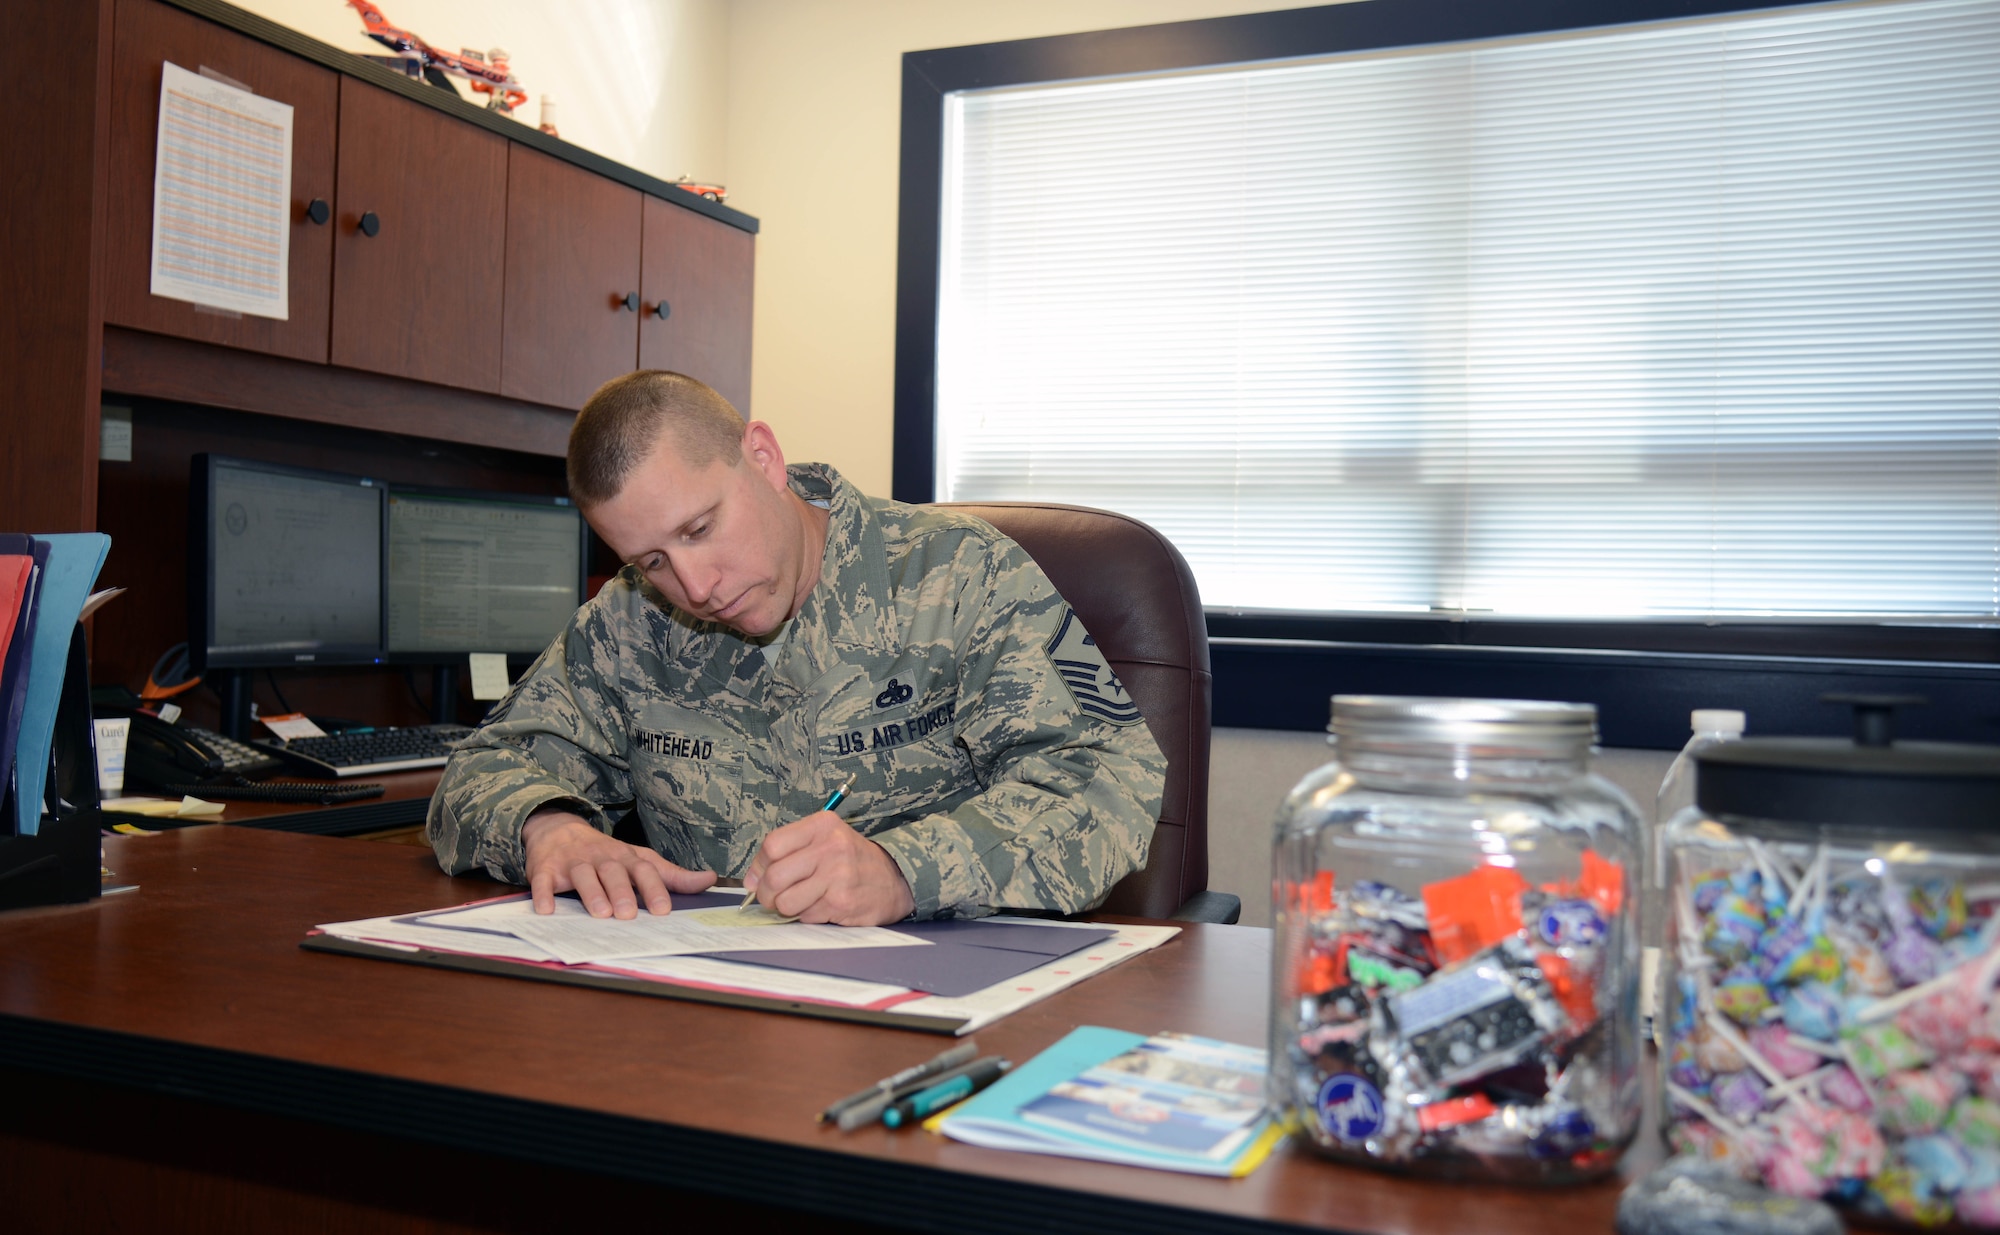 Master Sgt. Jason Whitehead, the 341st Security Forces Squadron first sergeant, completes paperwork in his office May 5, 2015, at Malmstrom Air Force Base, Mont. His duties are split between administrative work and being actively involved in Airmen’s lives. (U.S. Air Force photo/Airman 1st Class Dillon Johnston)